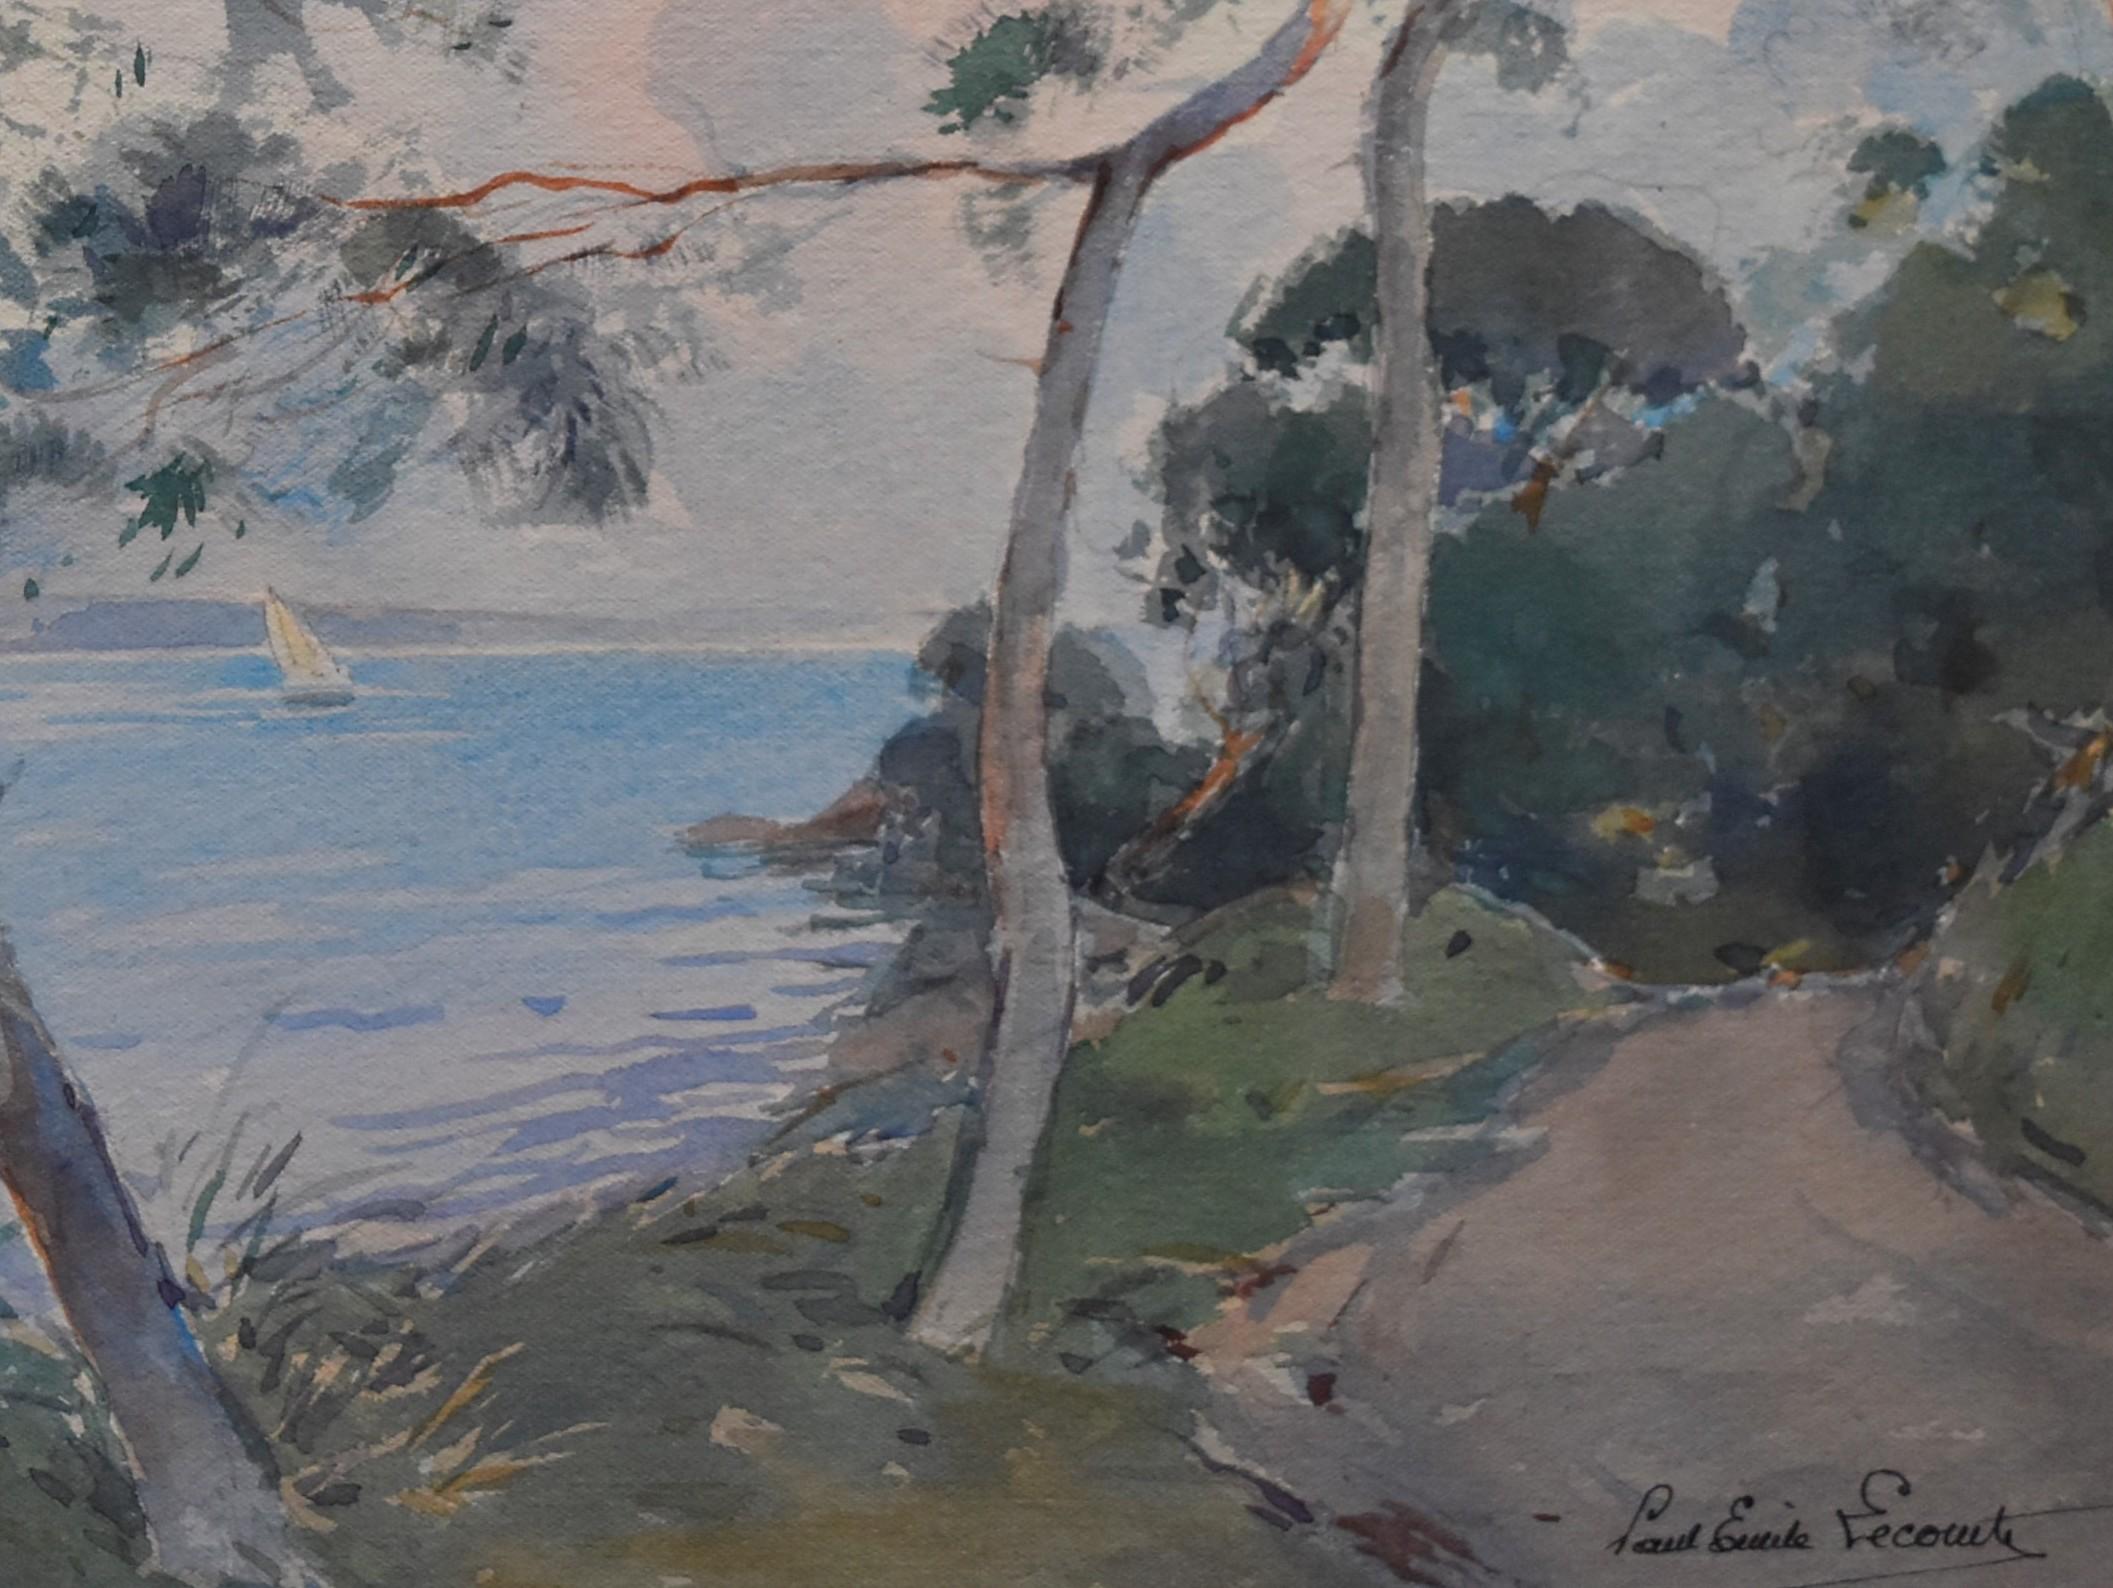 Paul Emile Lecomte (1877-1950)
La Rance, seaside with pines
Signed lower right
Watercolor on paper
26.5 x 35 cm
Signed lower right
Framed: 48 x 58 cm

Paul-Emile Lecomte painted an other version of this view of the estuary of the river Rance as an